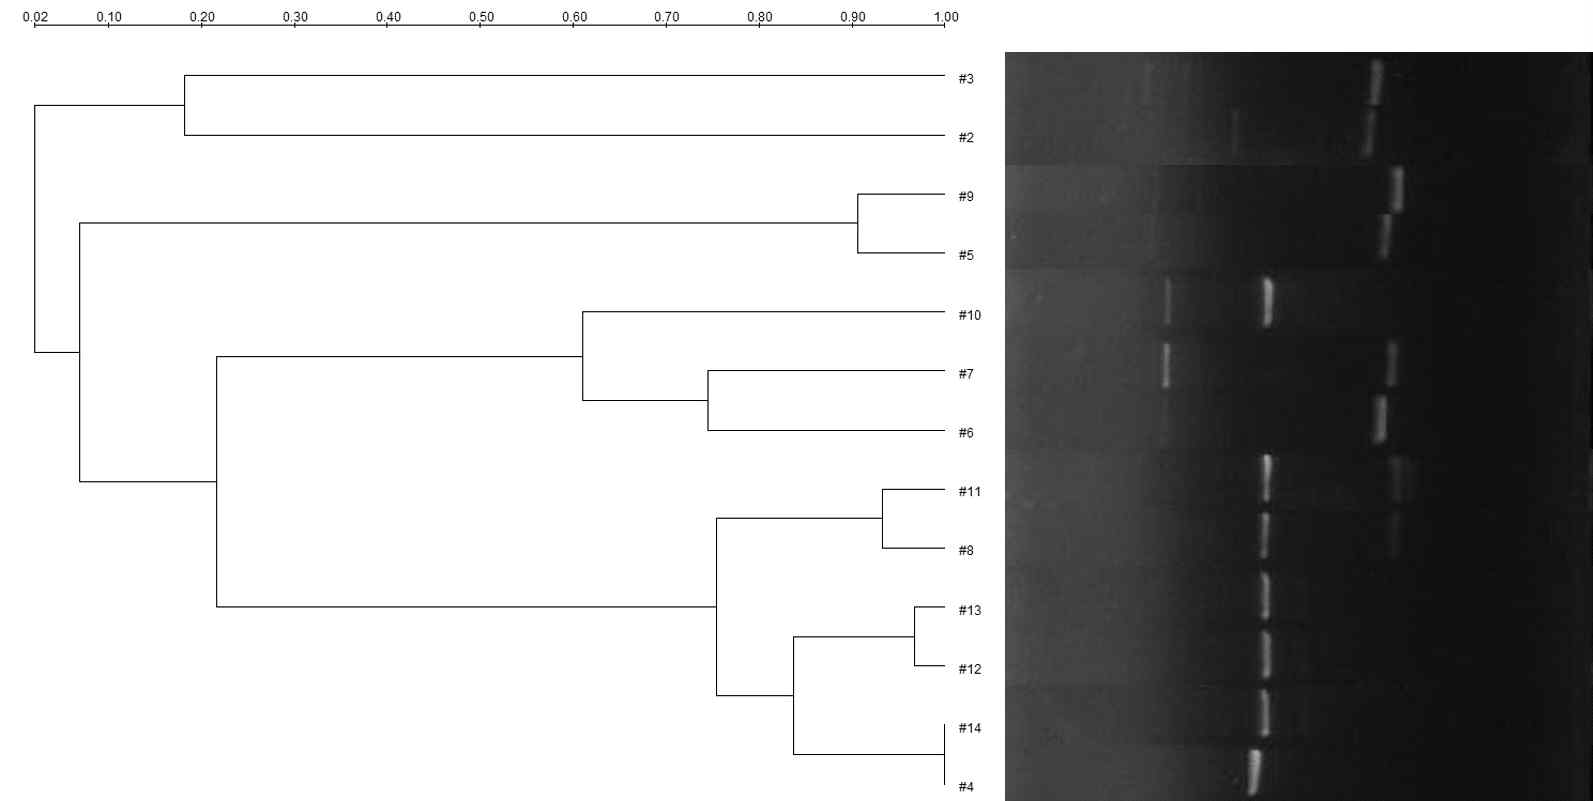 Dendrogram derived from cluster analysis(UPGMA) showing relationship among 13 strains of L. brevis spp.